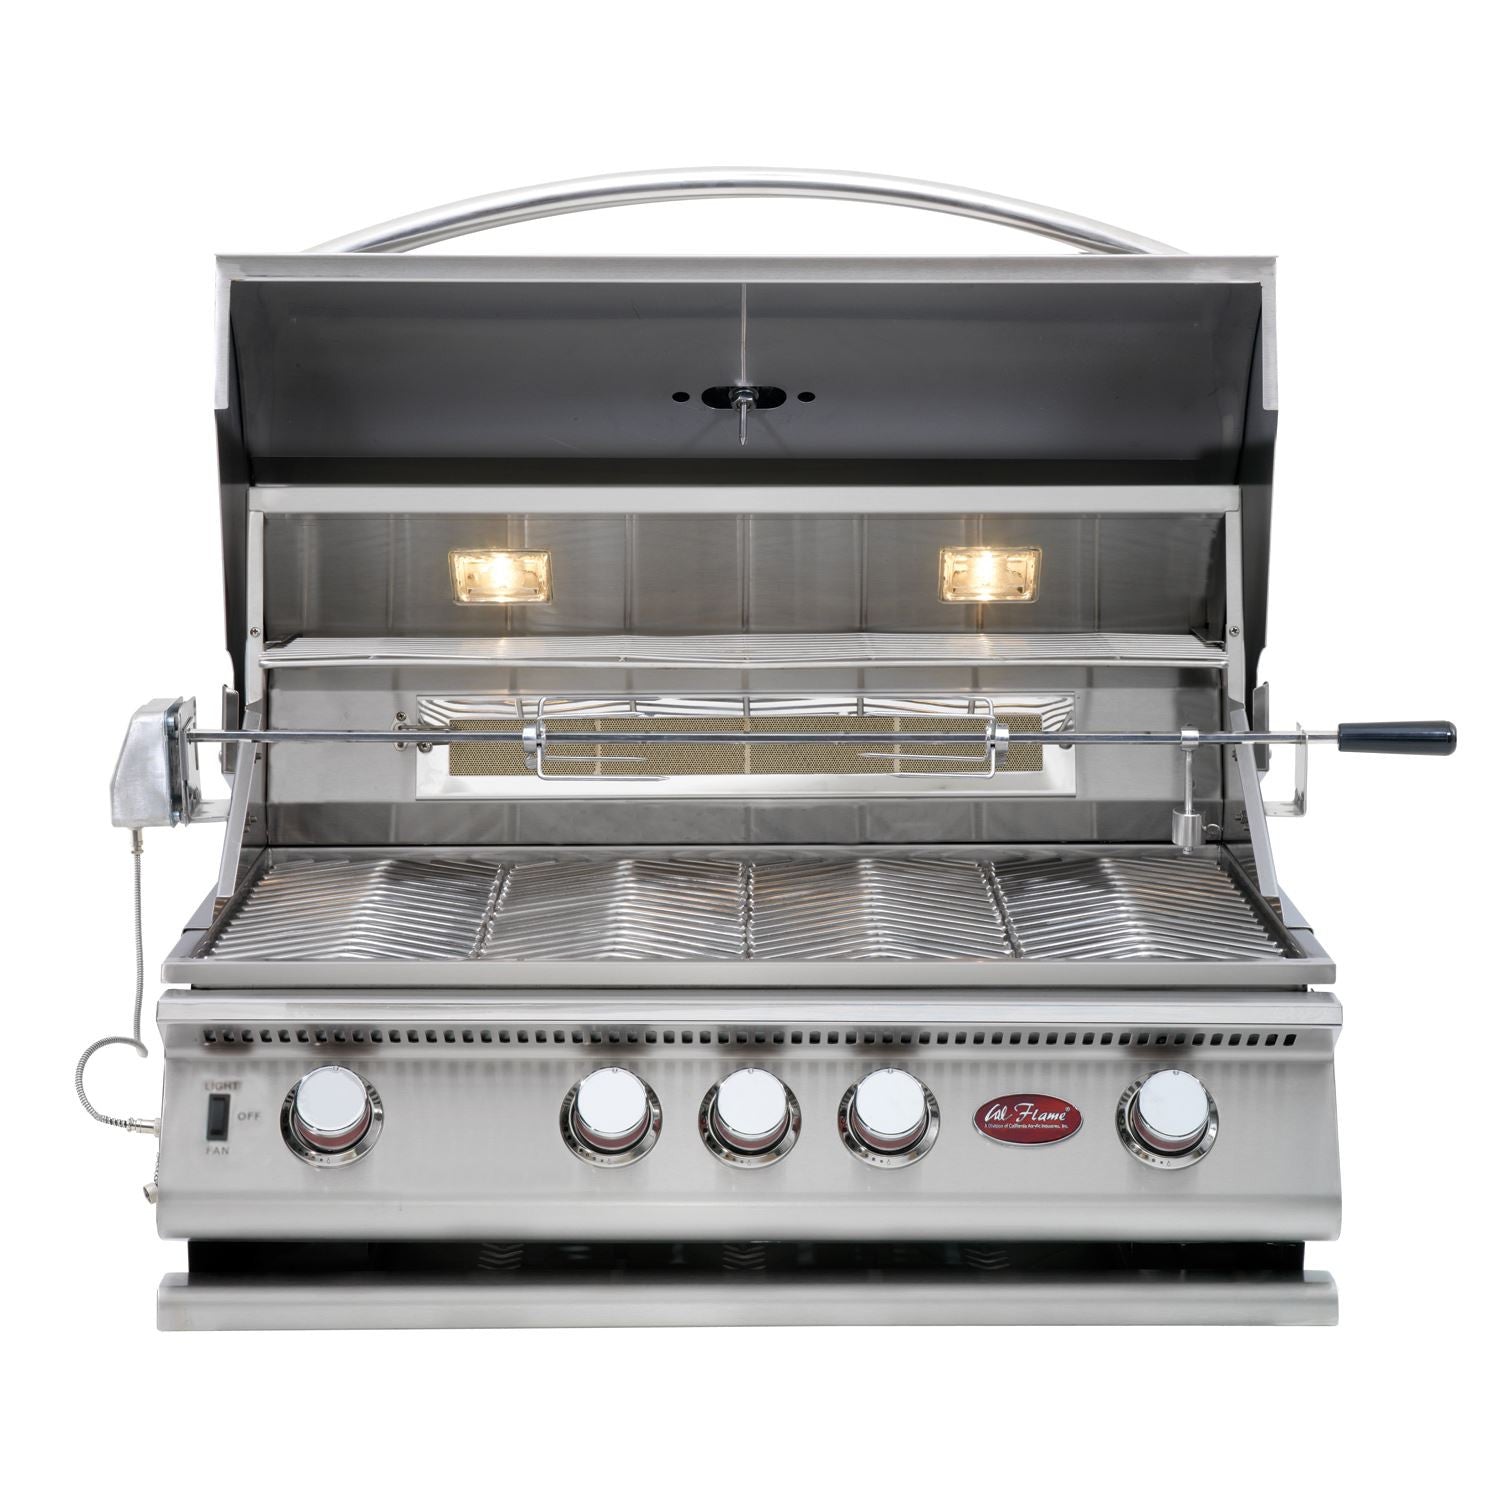 Cal FlameCal Flame P4 32 Inch 4 Burner Built-In Grill with Rotisserie, Griddle BBQ19P04 BBQ19P04- BetterPatio.com